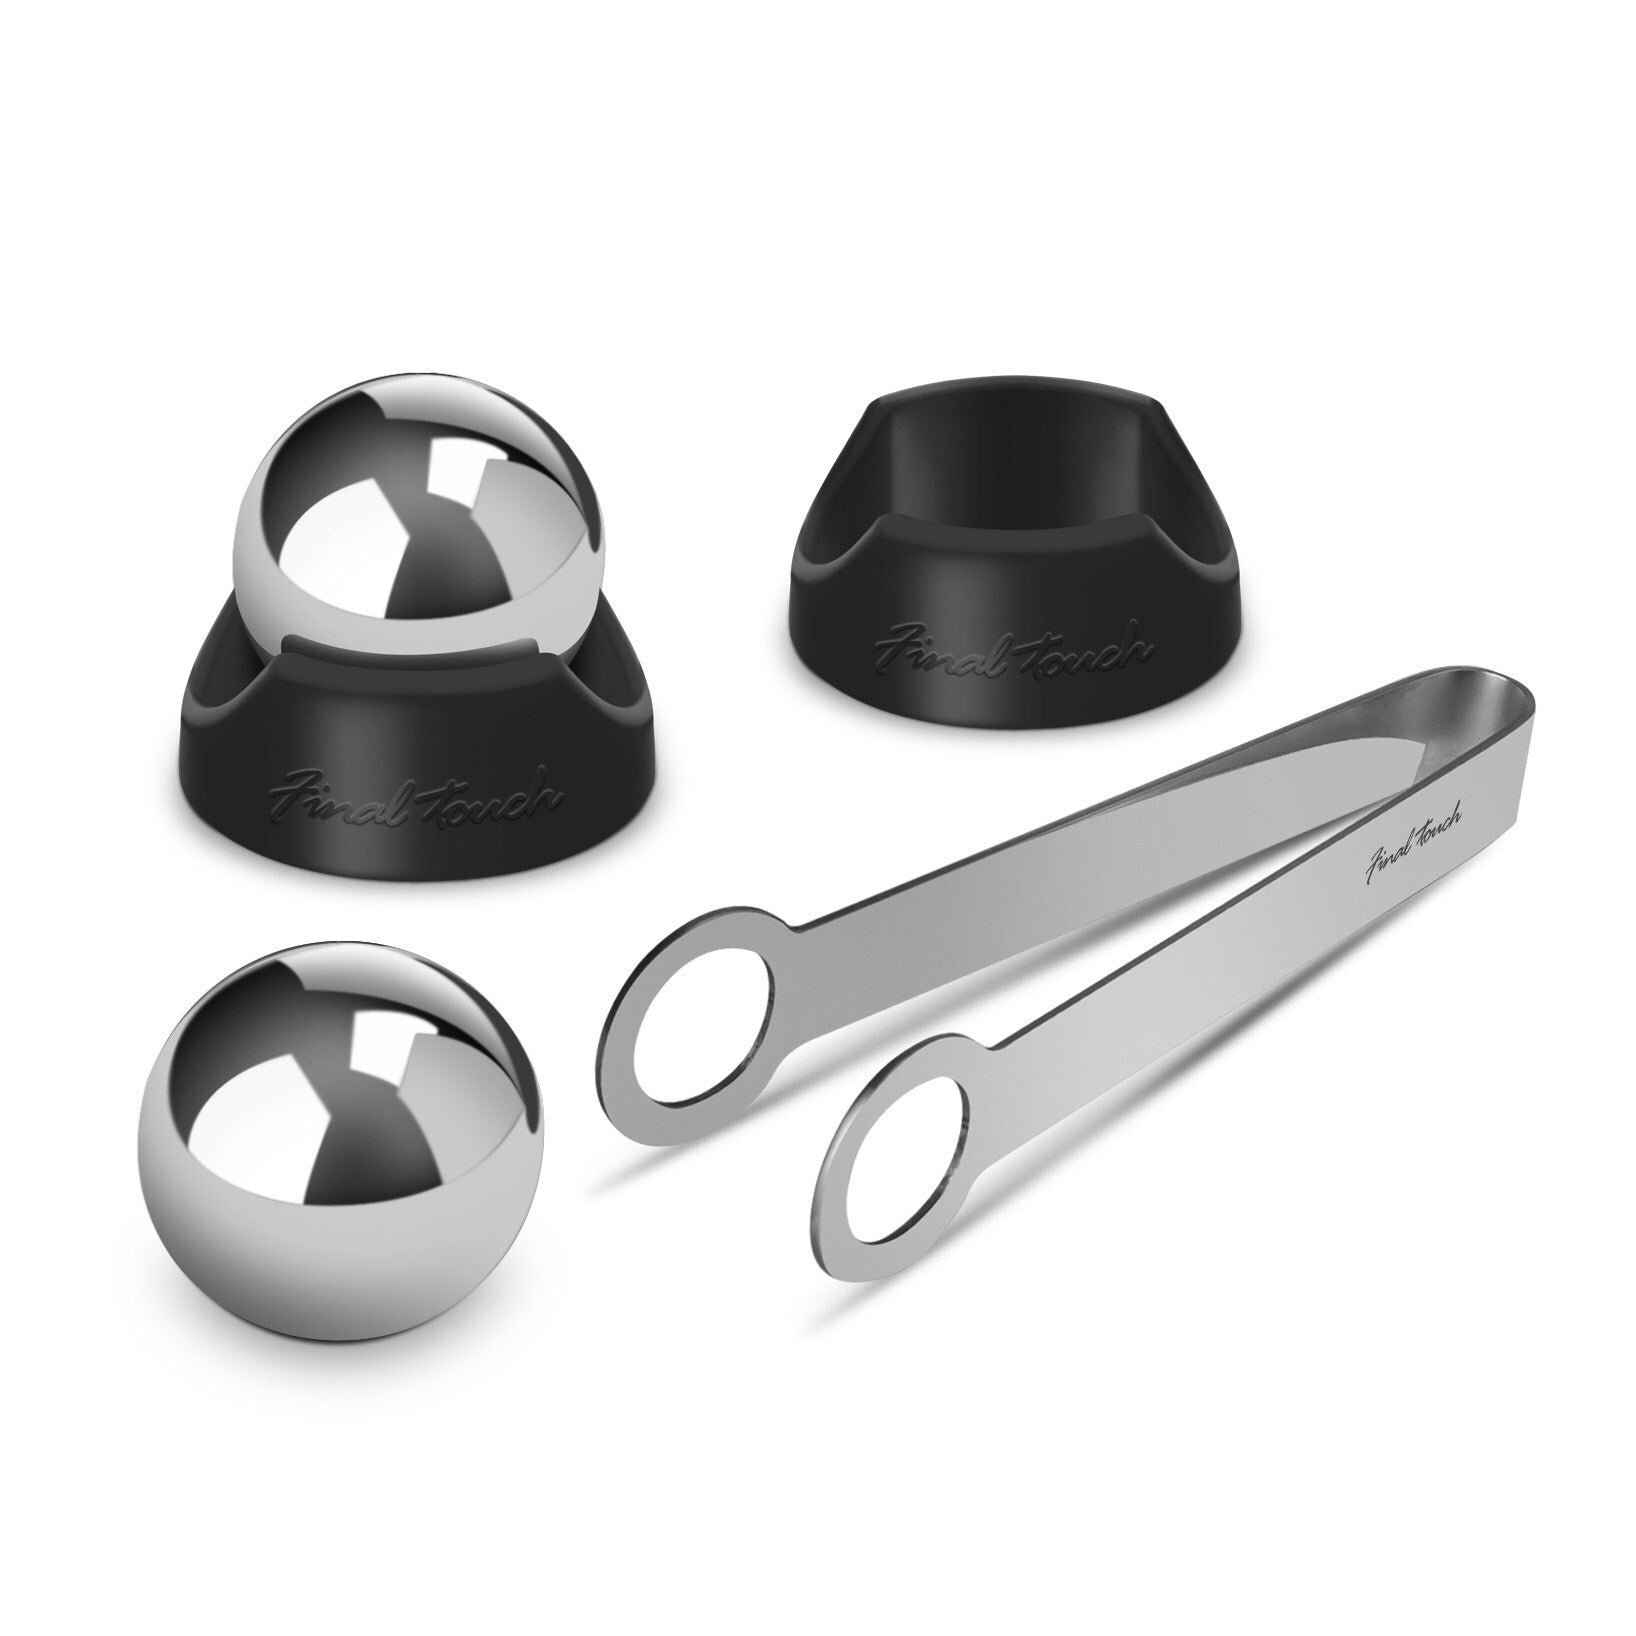 Stainless Steel Chilling Balls - Set of 2